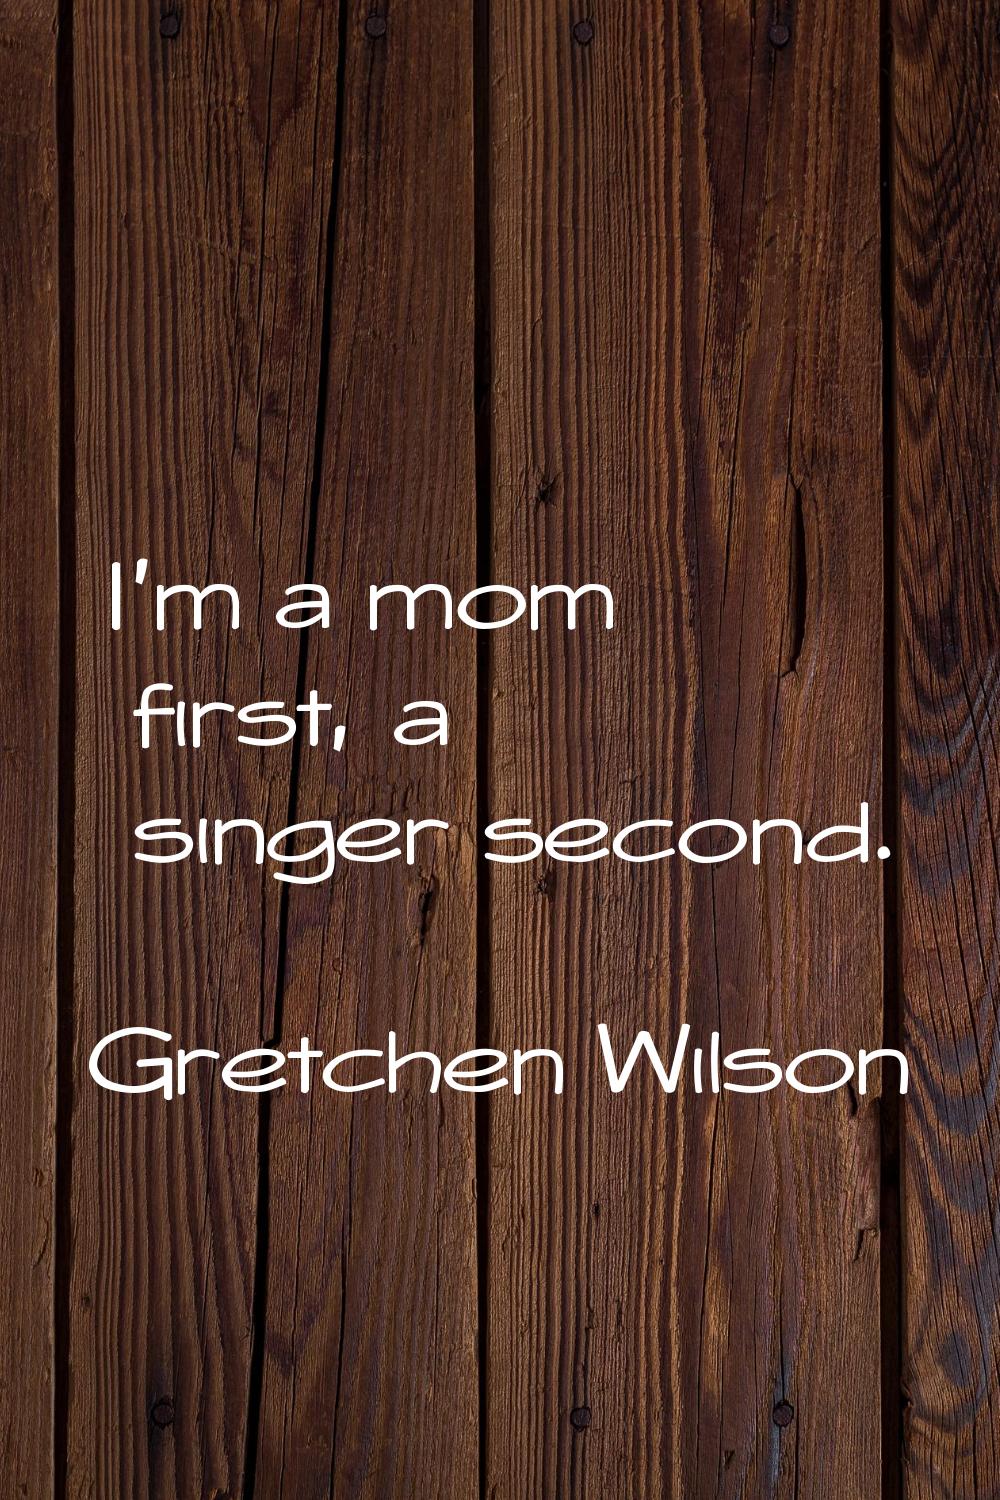 I'm a mom first, a singer second.